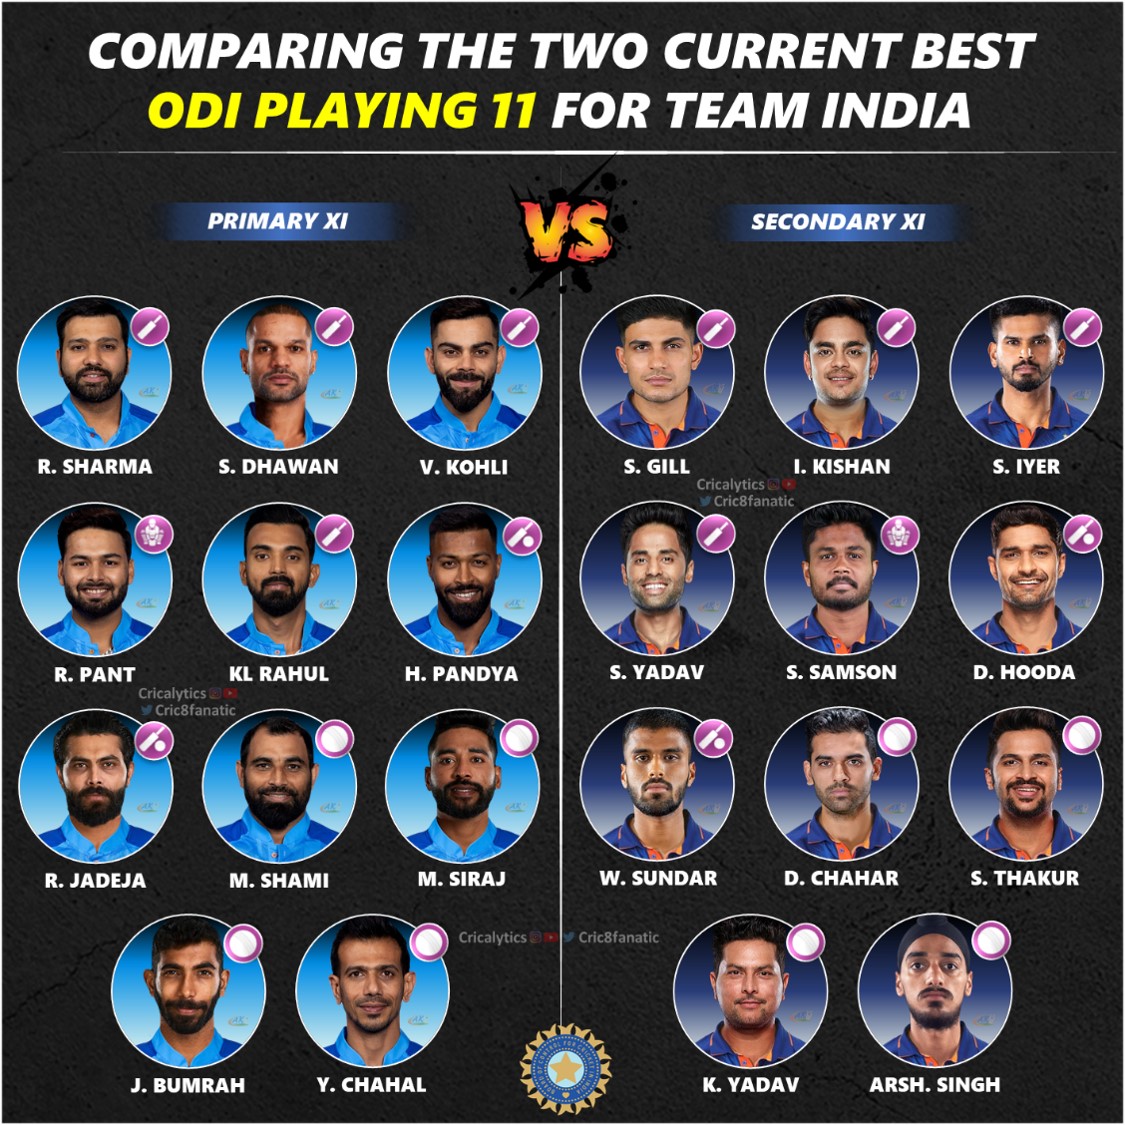 the current two best odi playing 11 for team india